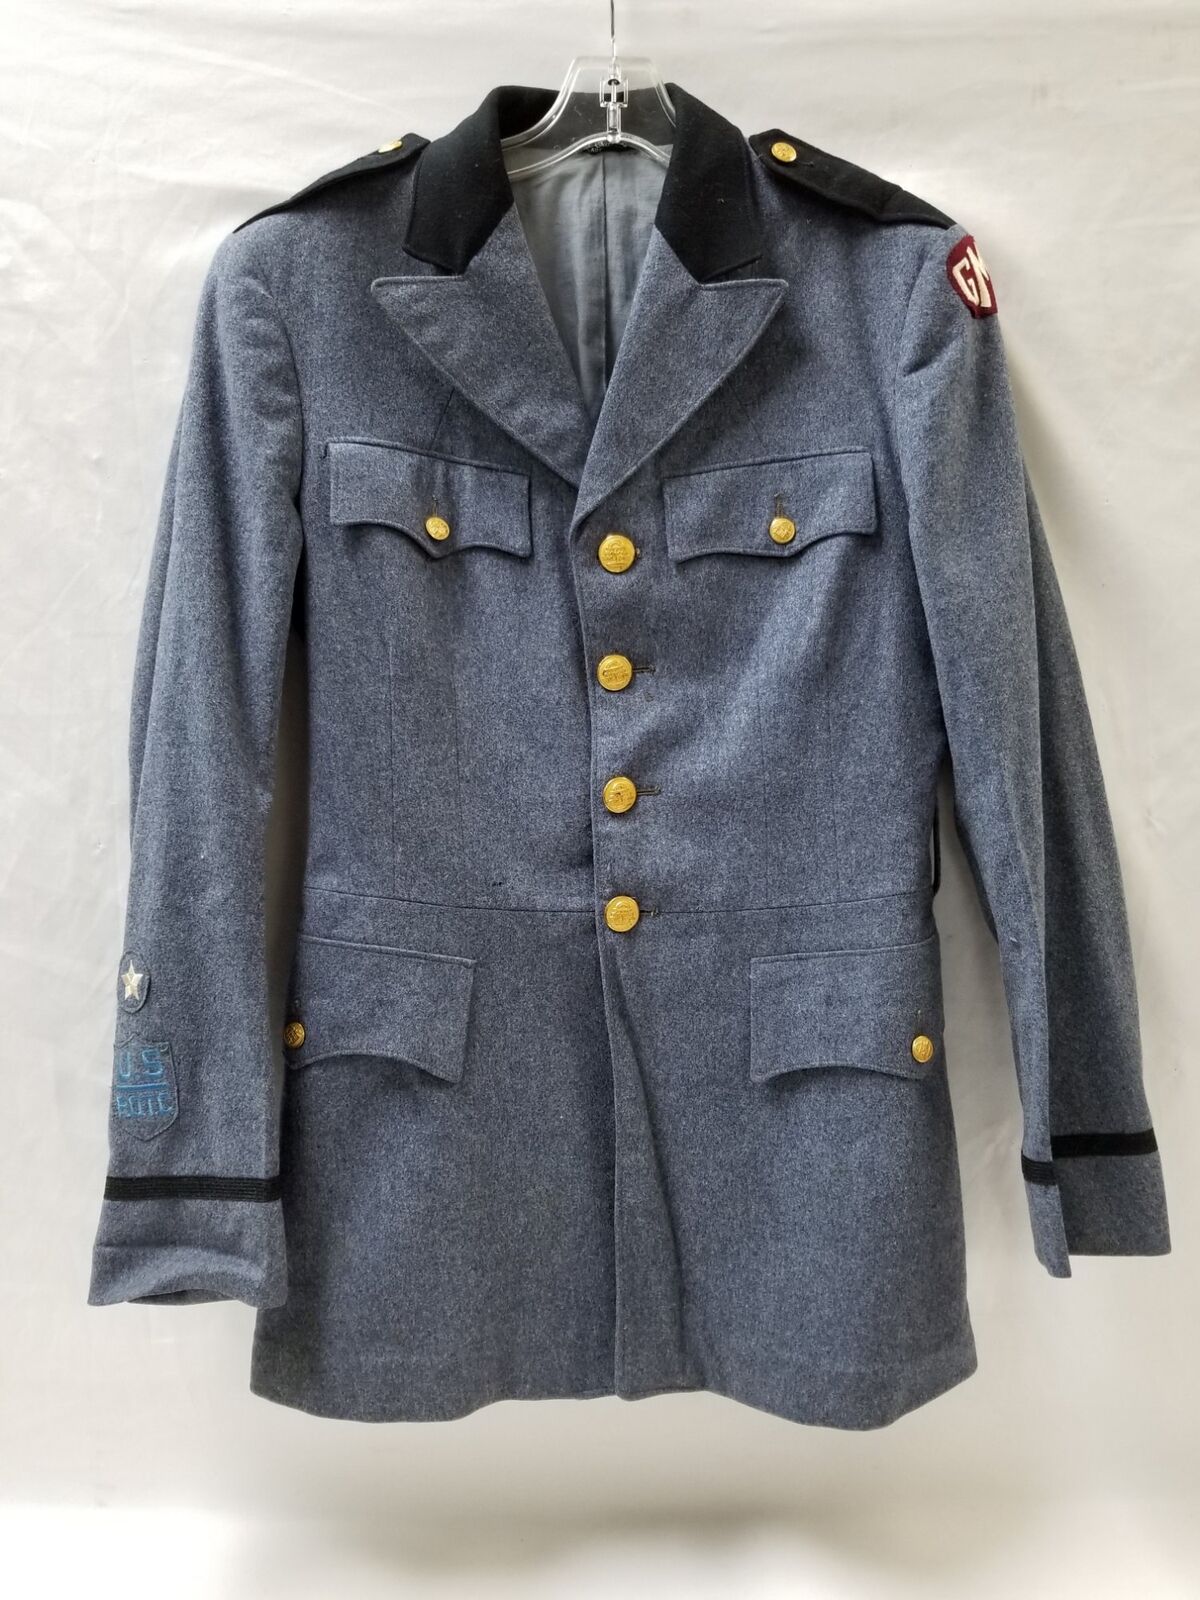 Vintage Jacob Reed's Sons Blue Military Academy Coat Jacket w/ ROTC Patches